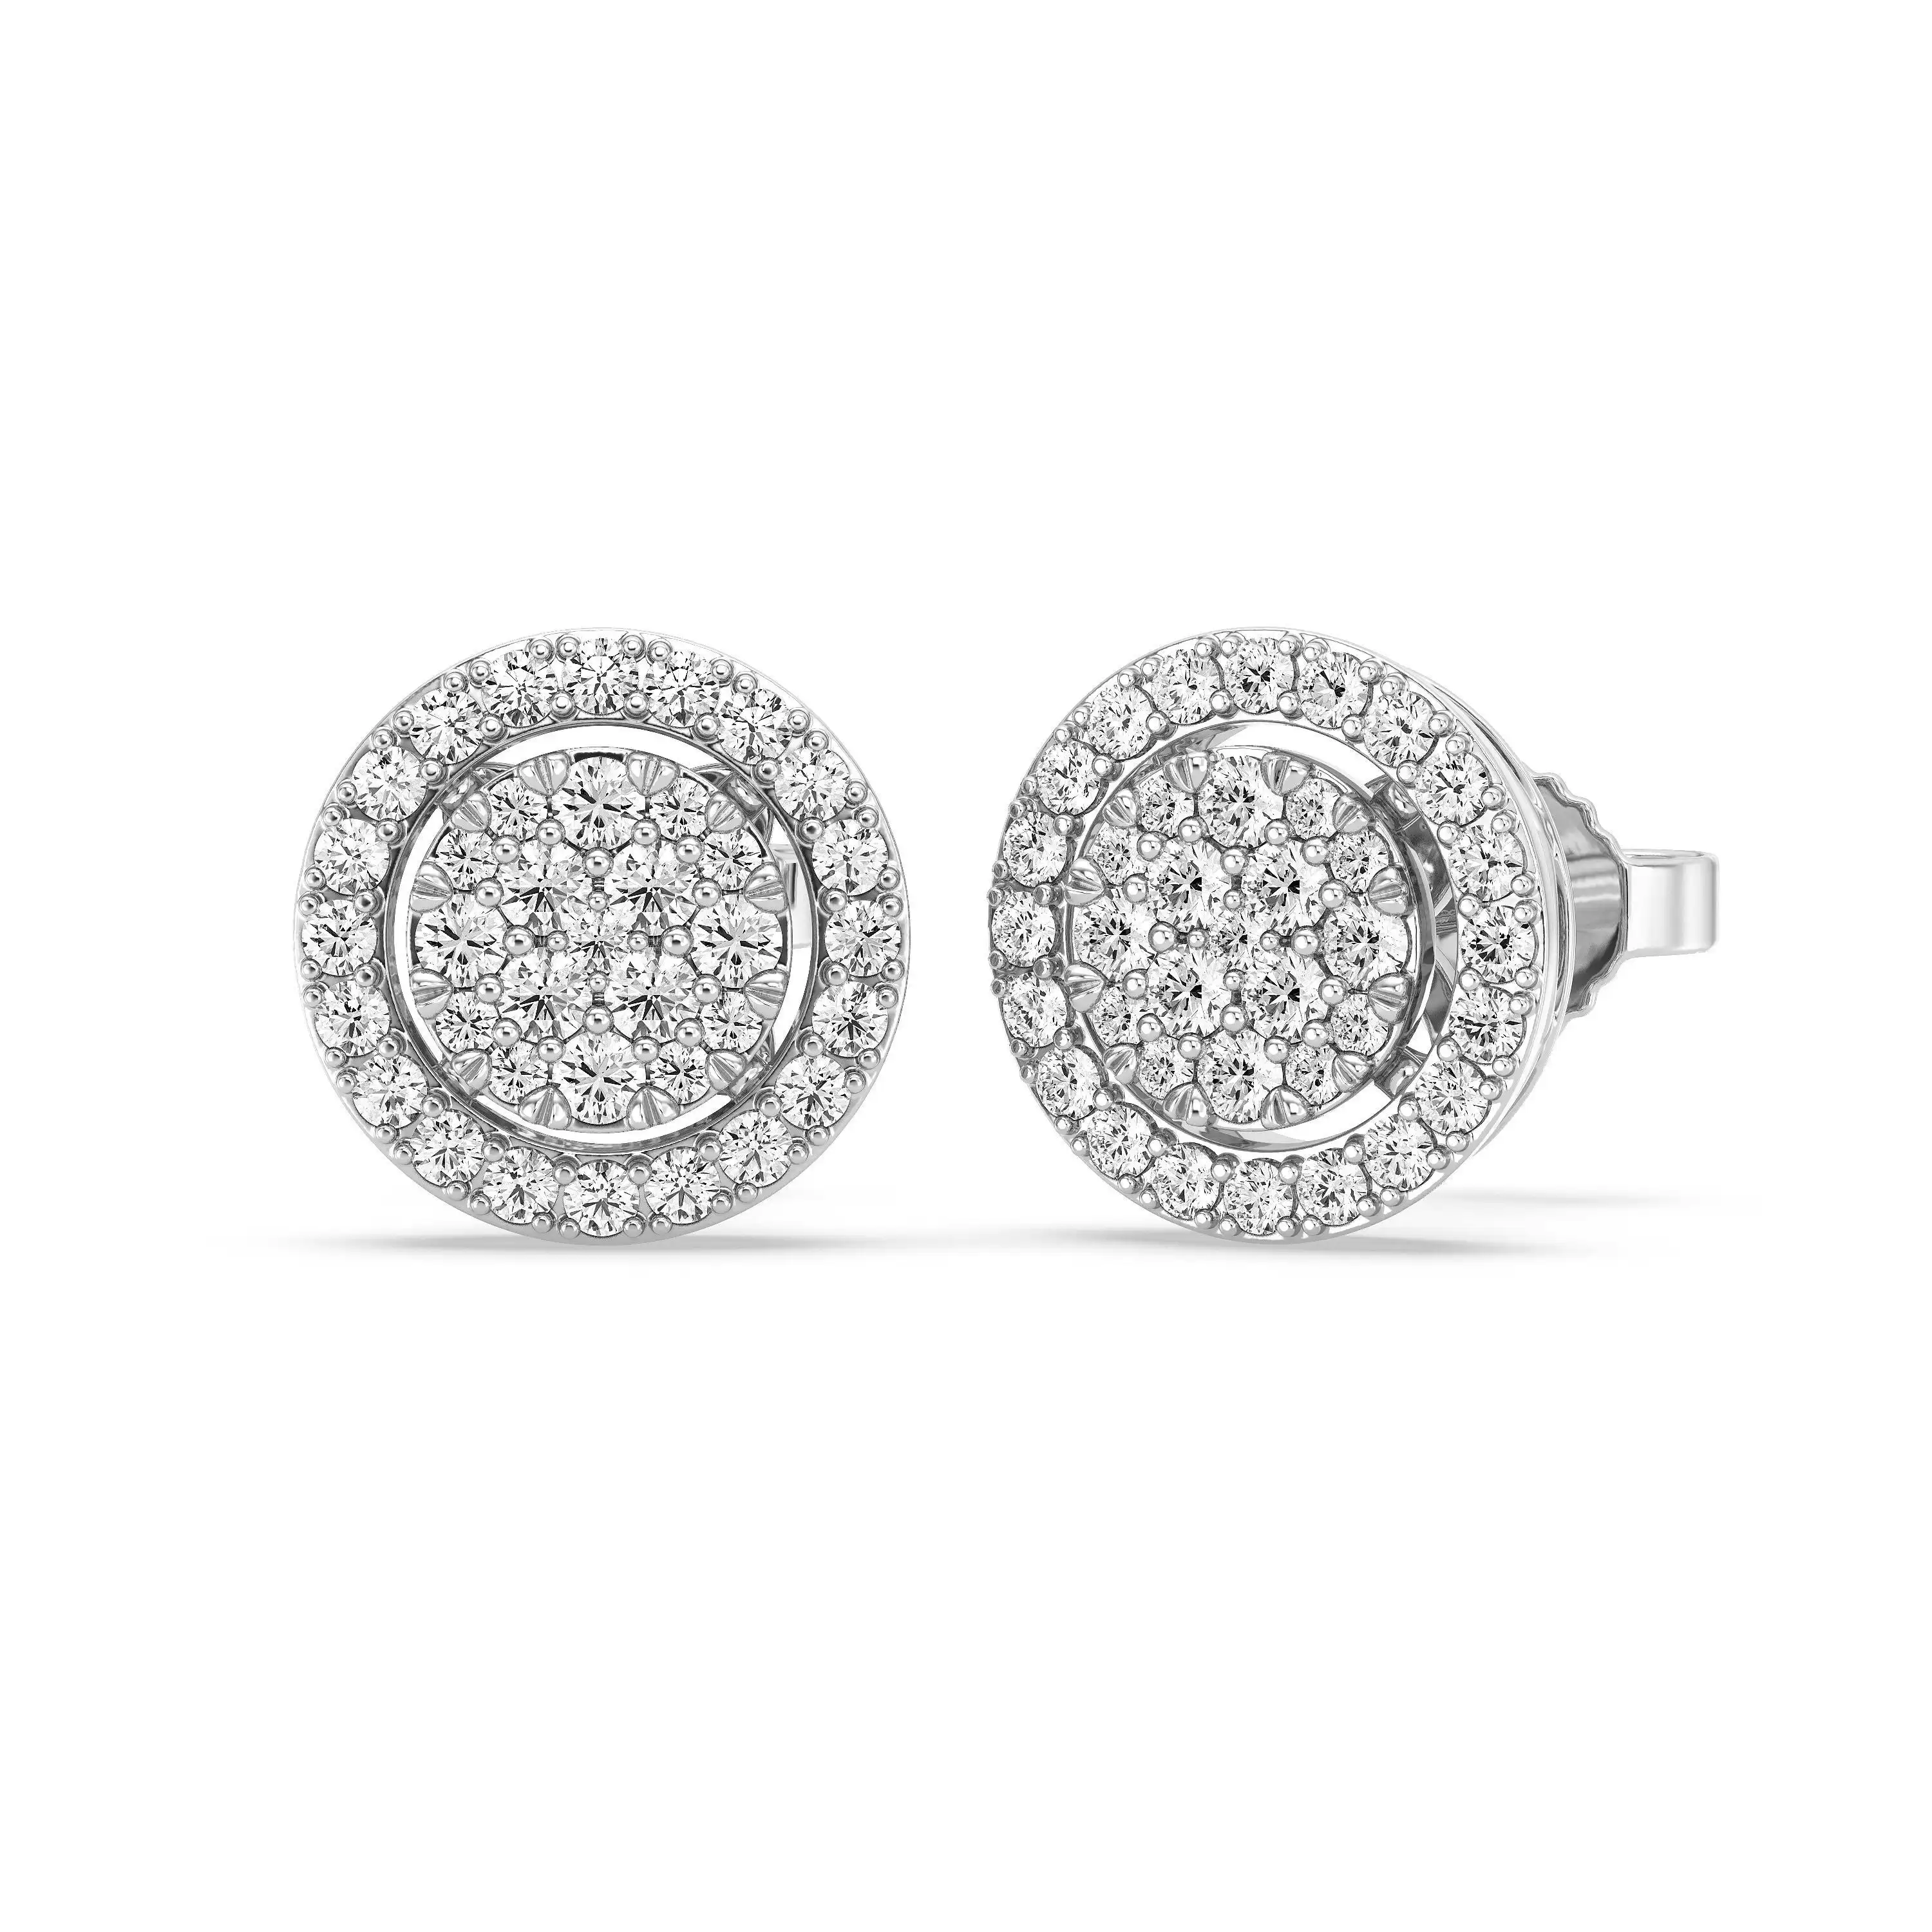 Mirage Halo Stud Earrings with 1/2ct of Laboratory Grown Diamonds in Sterling Silver and Platinum